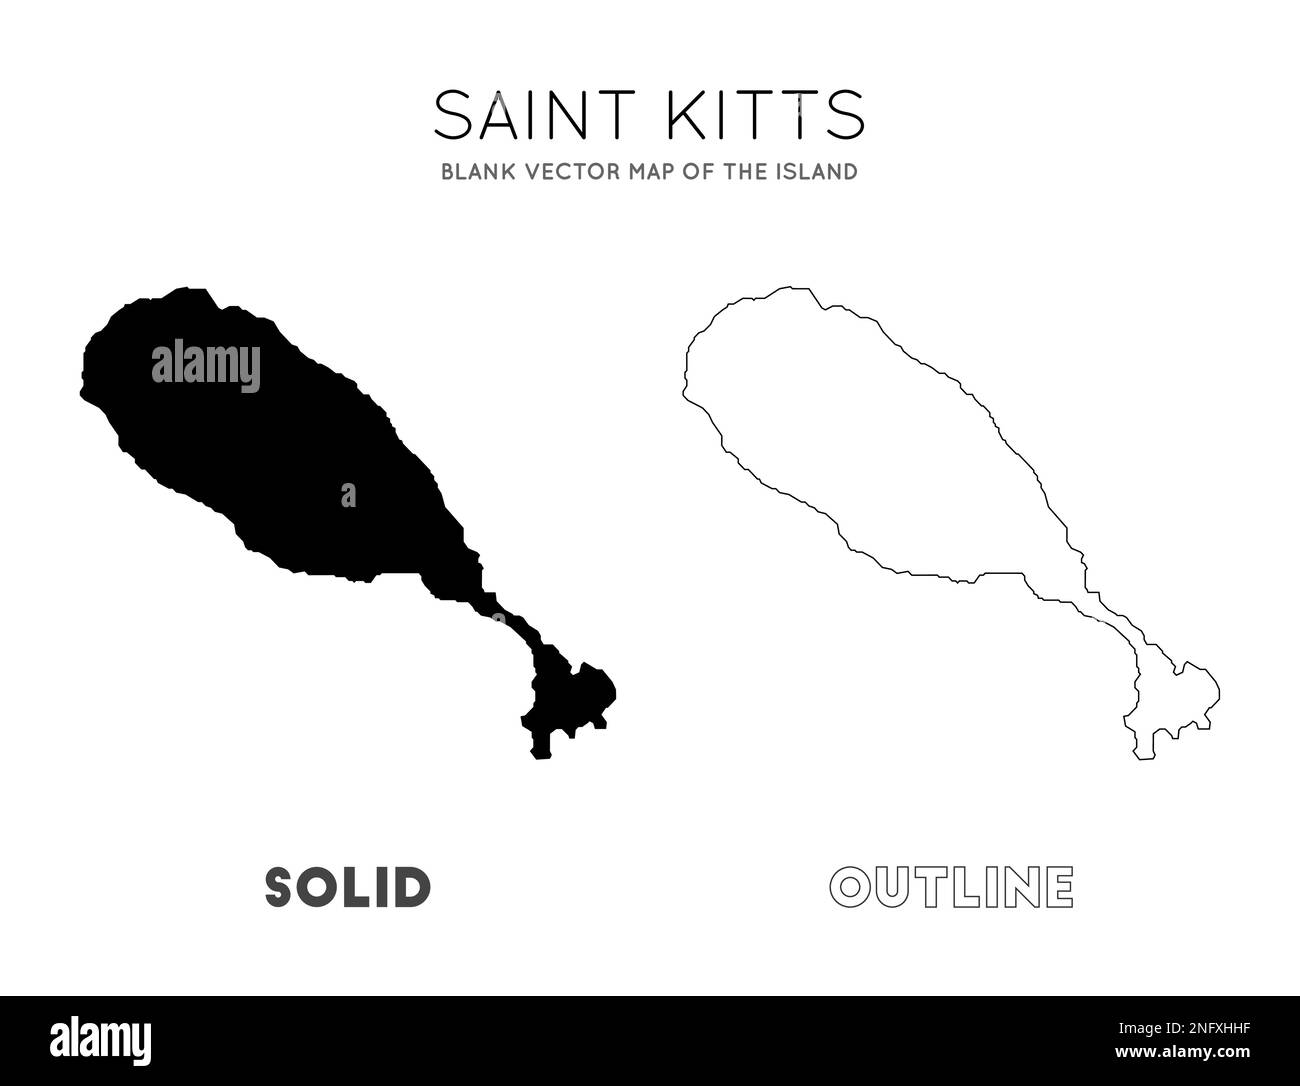 Saint Kitts map. Blank vector map of the Island. Borders of Saint Kitts for your infographic. Vector illustration. Stock Vector